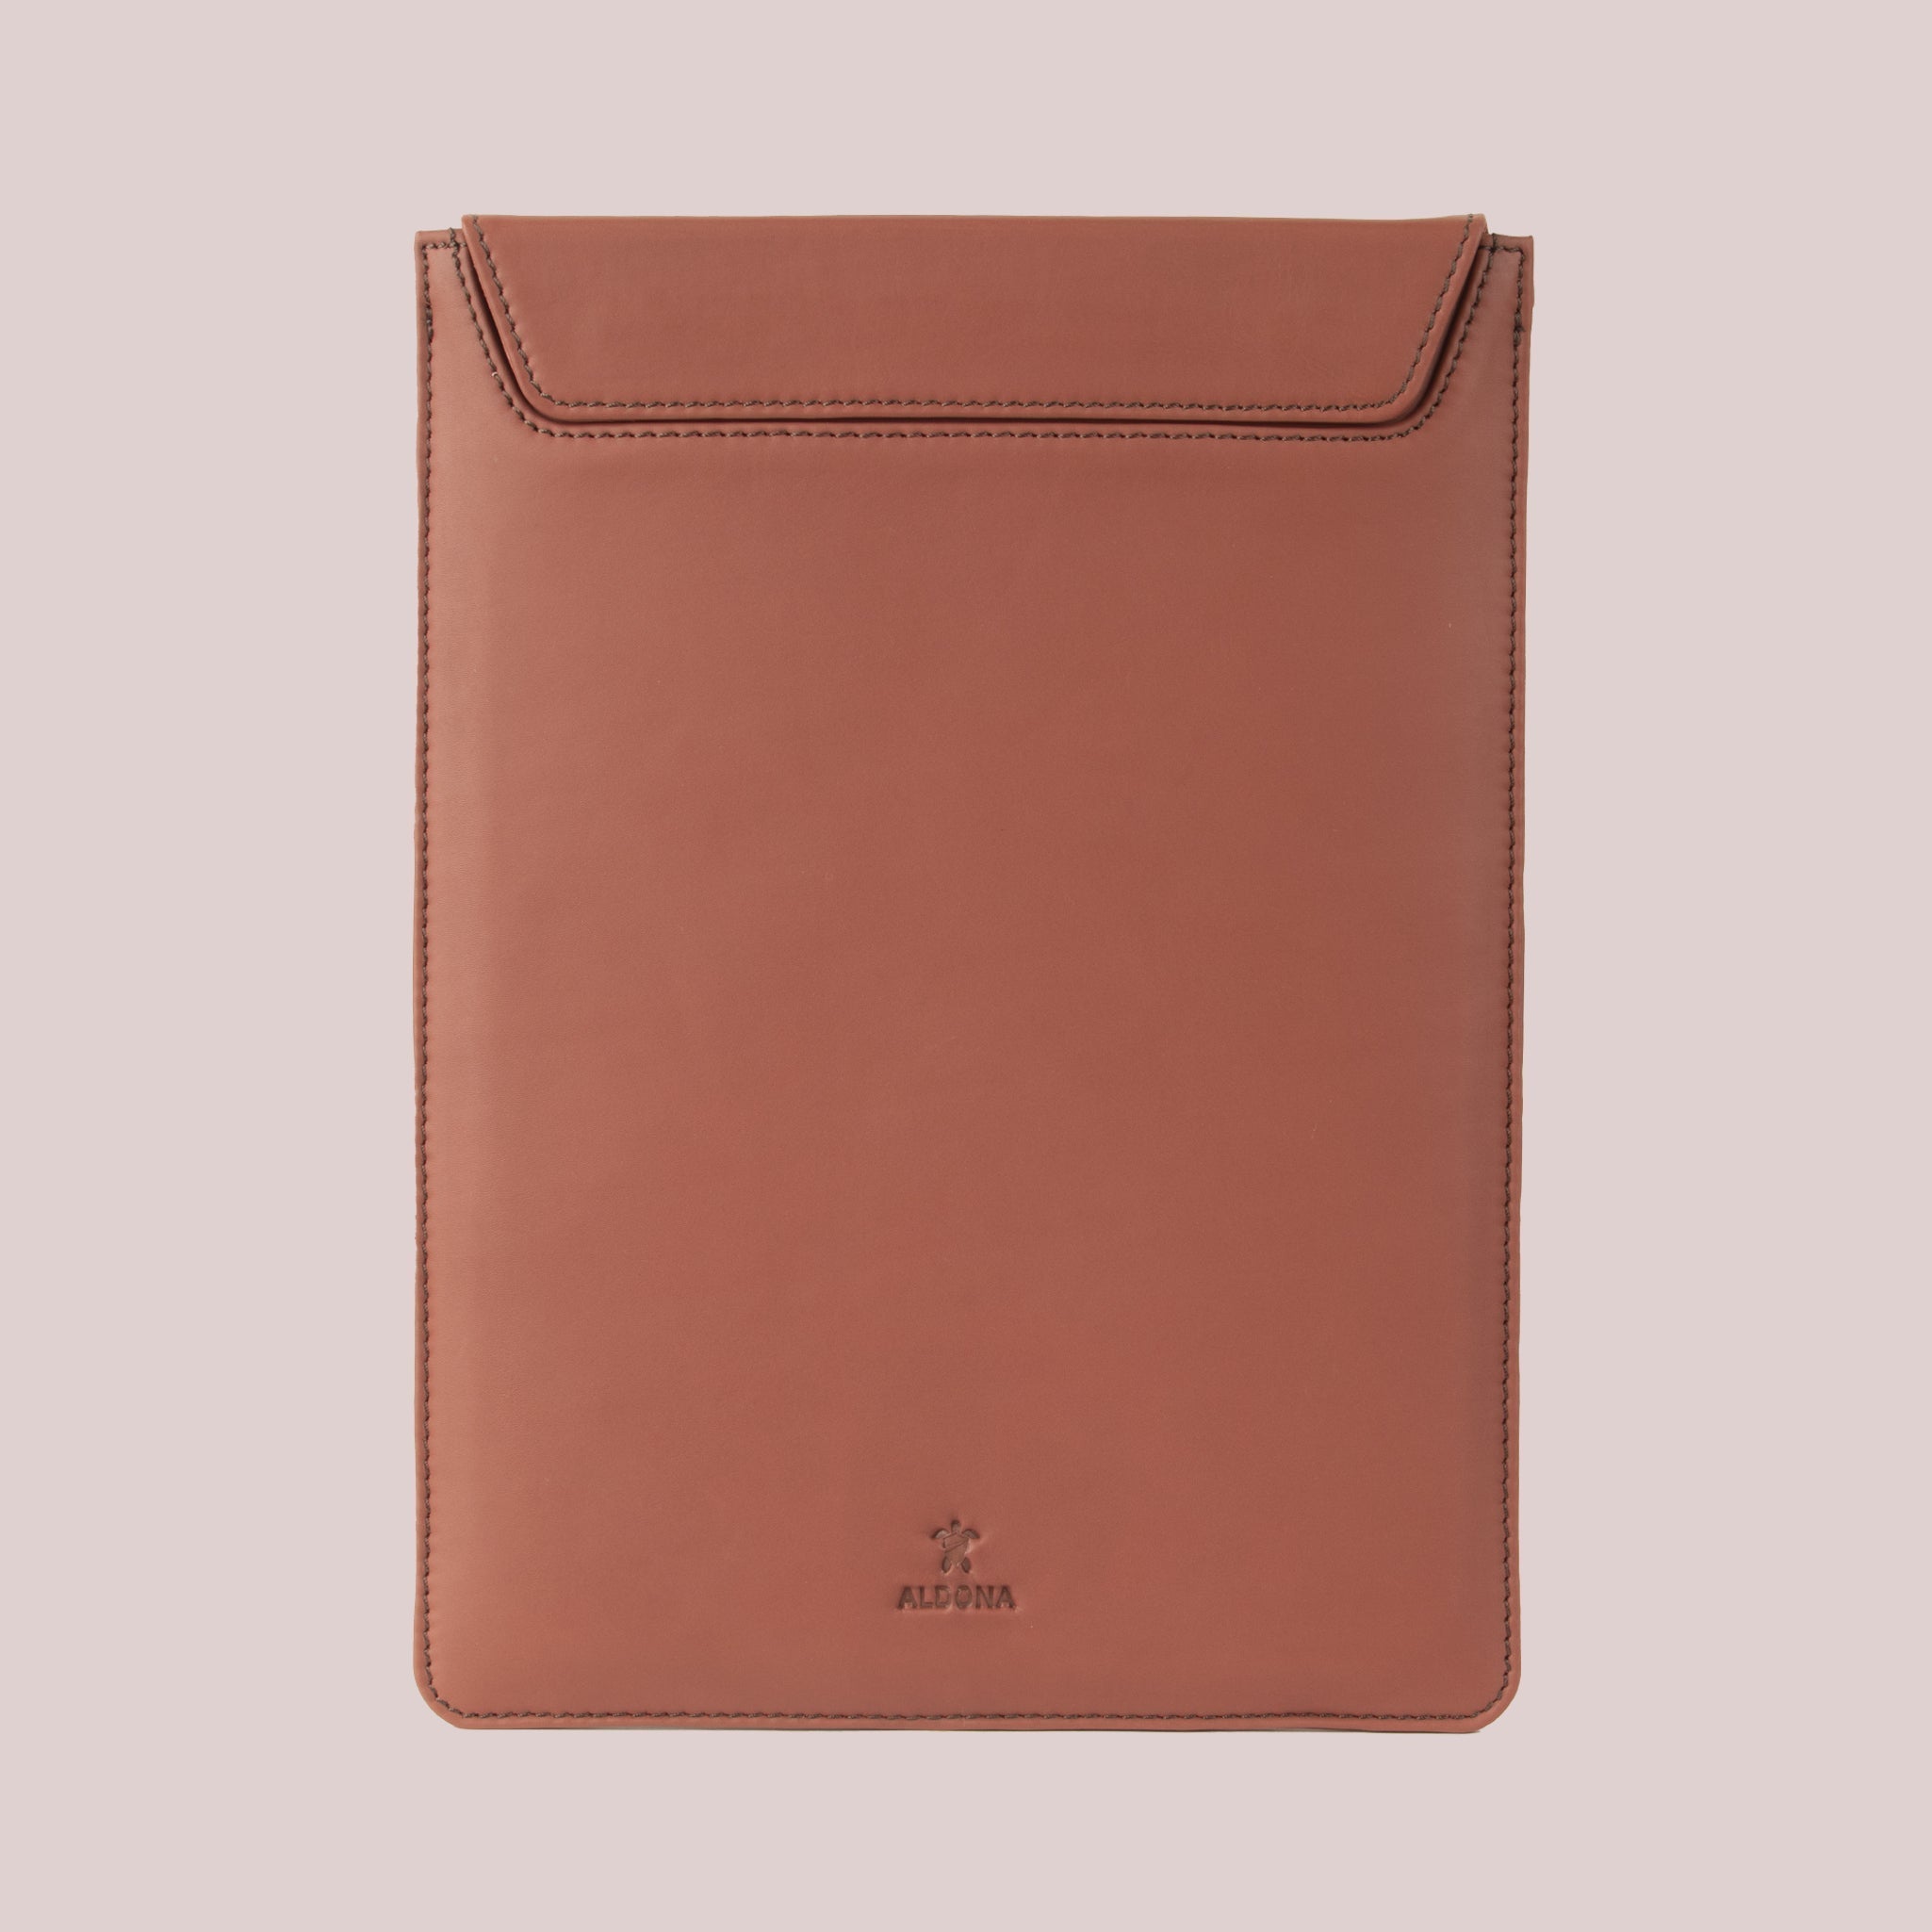 Macbook leather case in brown color